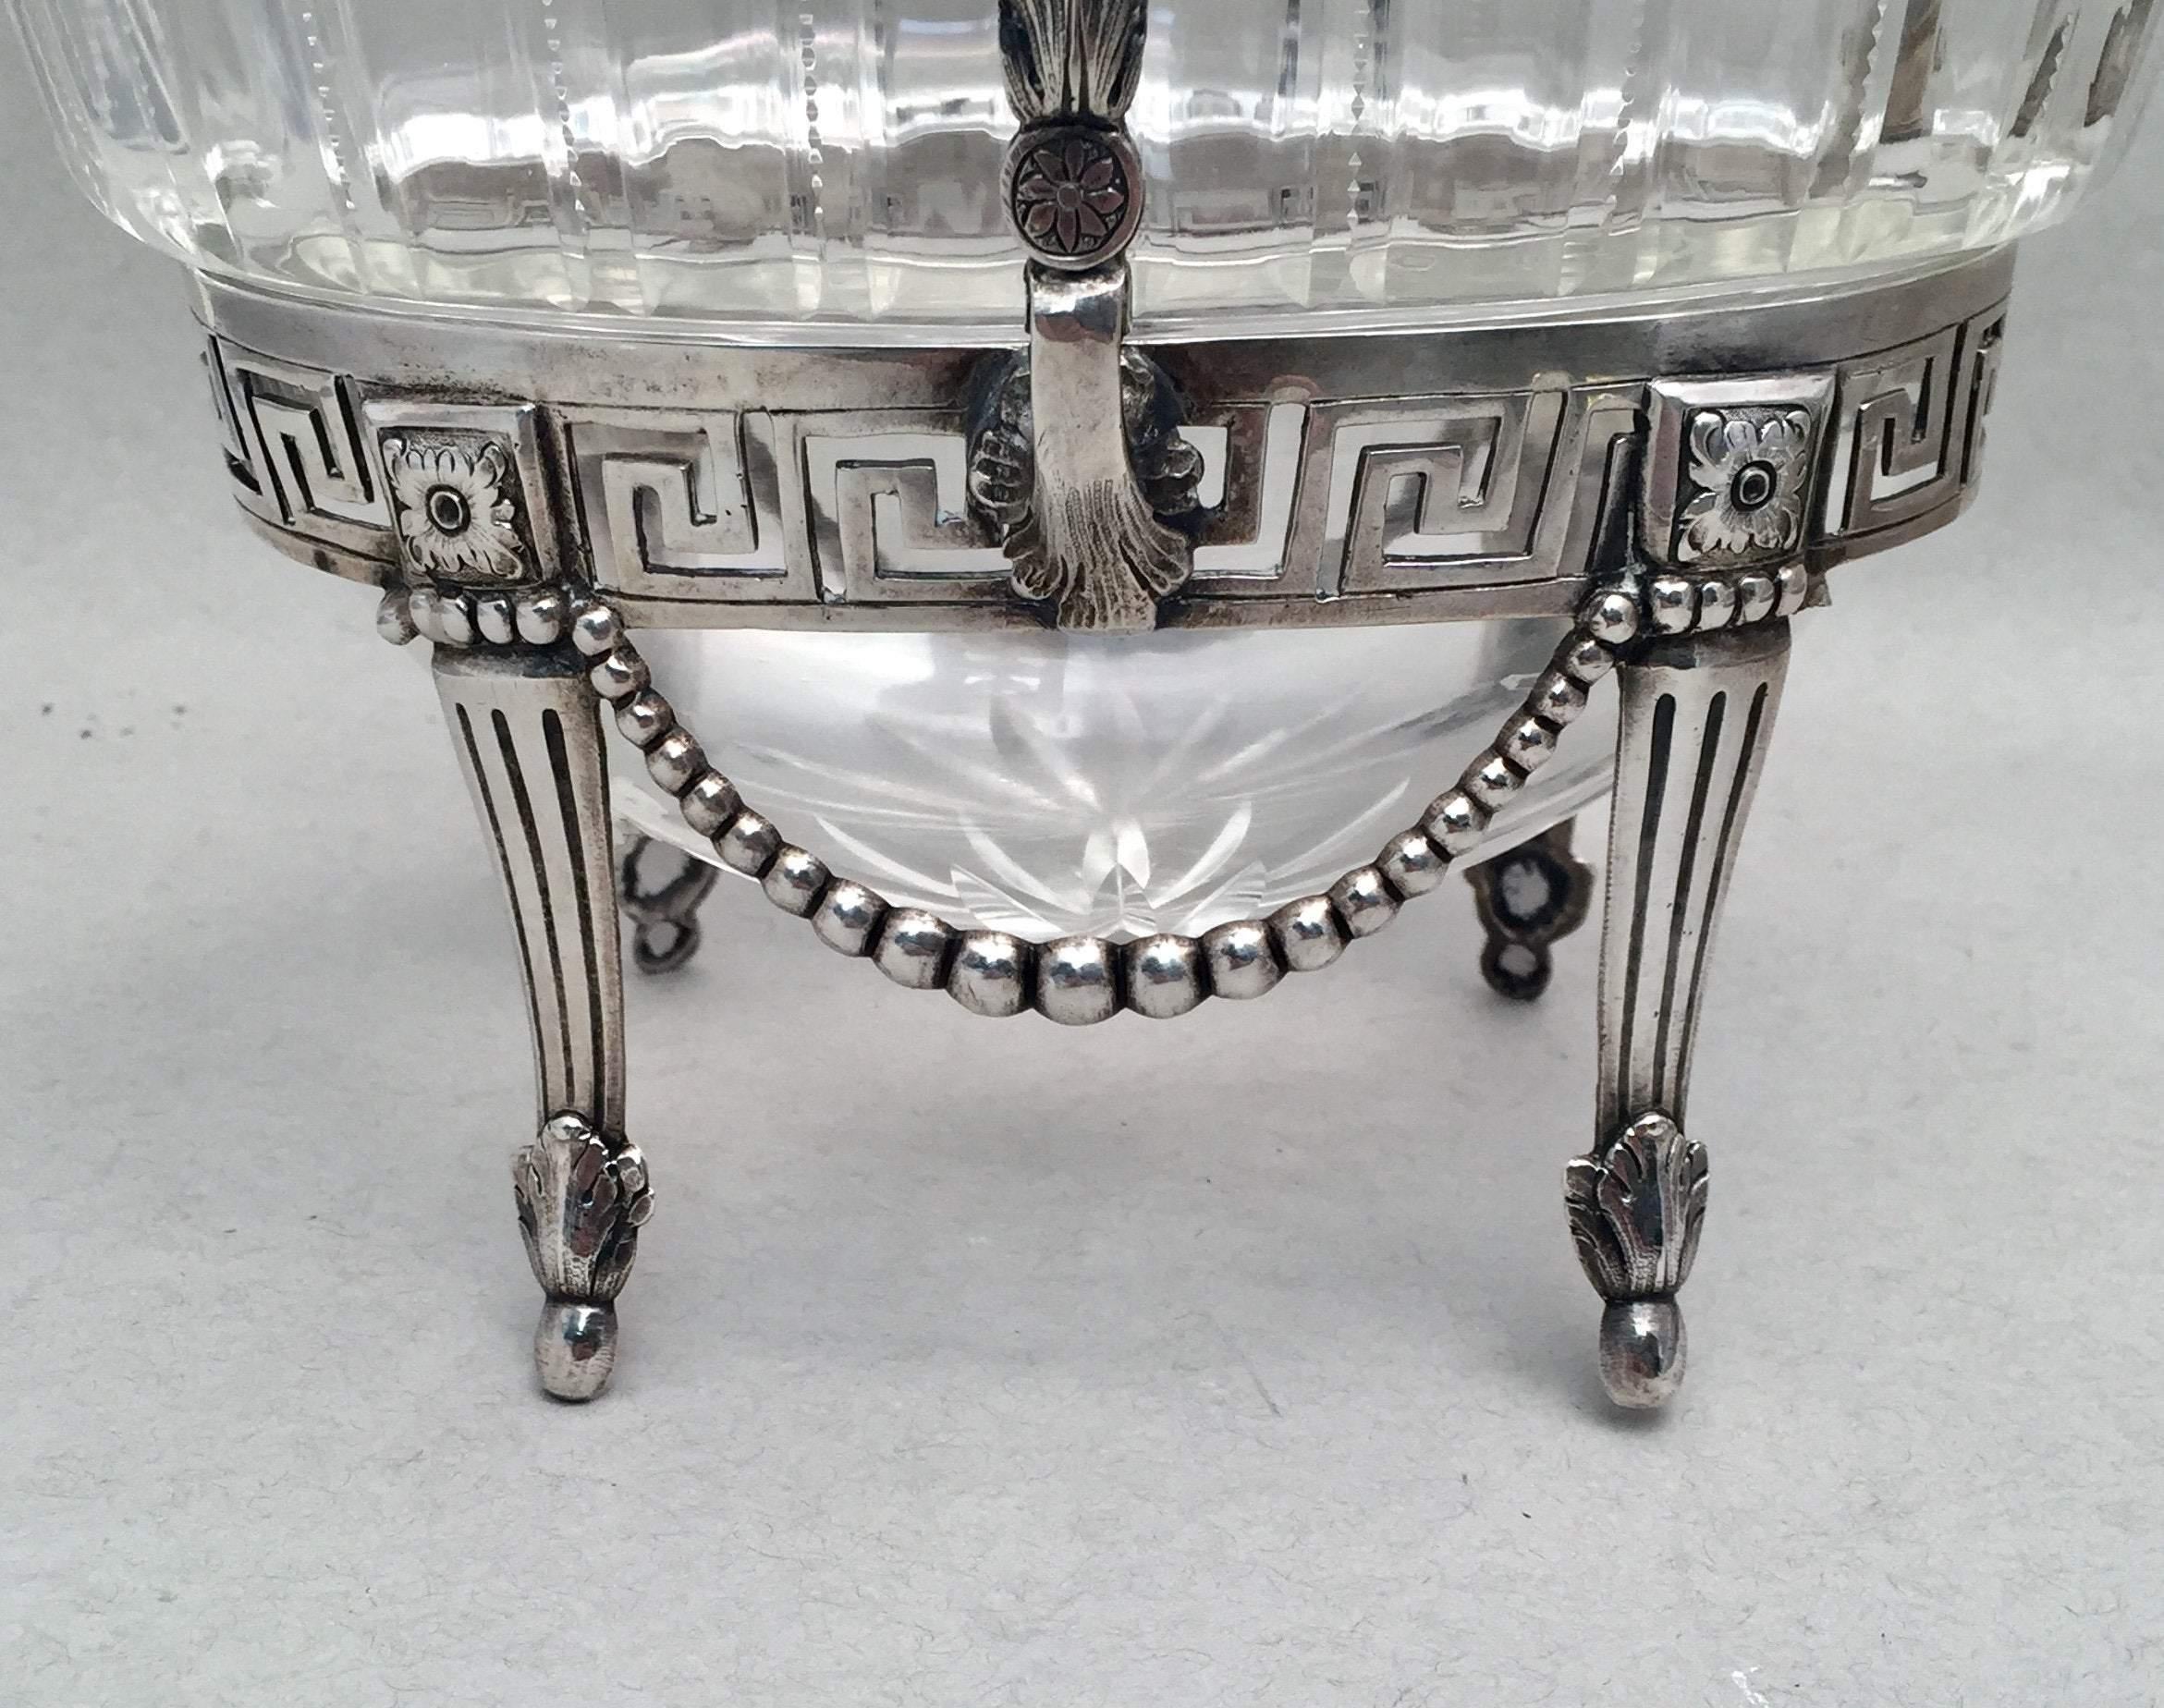 A beautiful coin silver bridal basket with a removable glass insert. Standing on four feet with leaf pattern. Measuring 7 1/5 inches tall and 6 1/3 inches wide. Unmarked. 

 